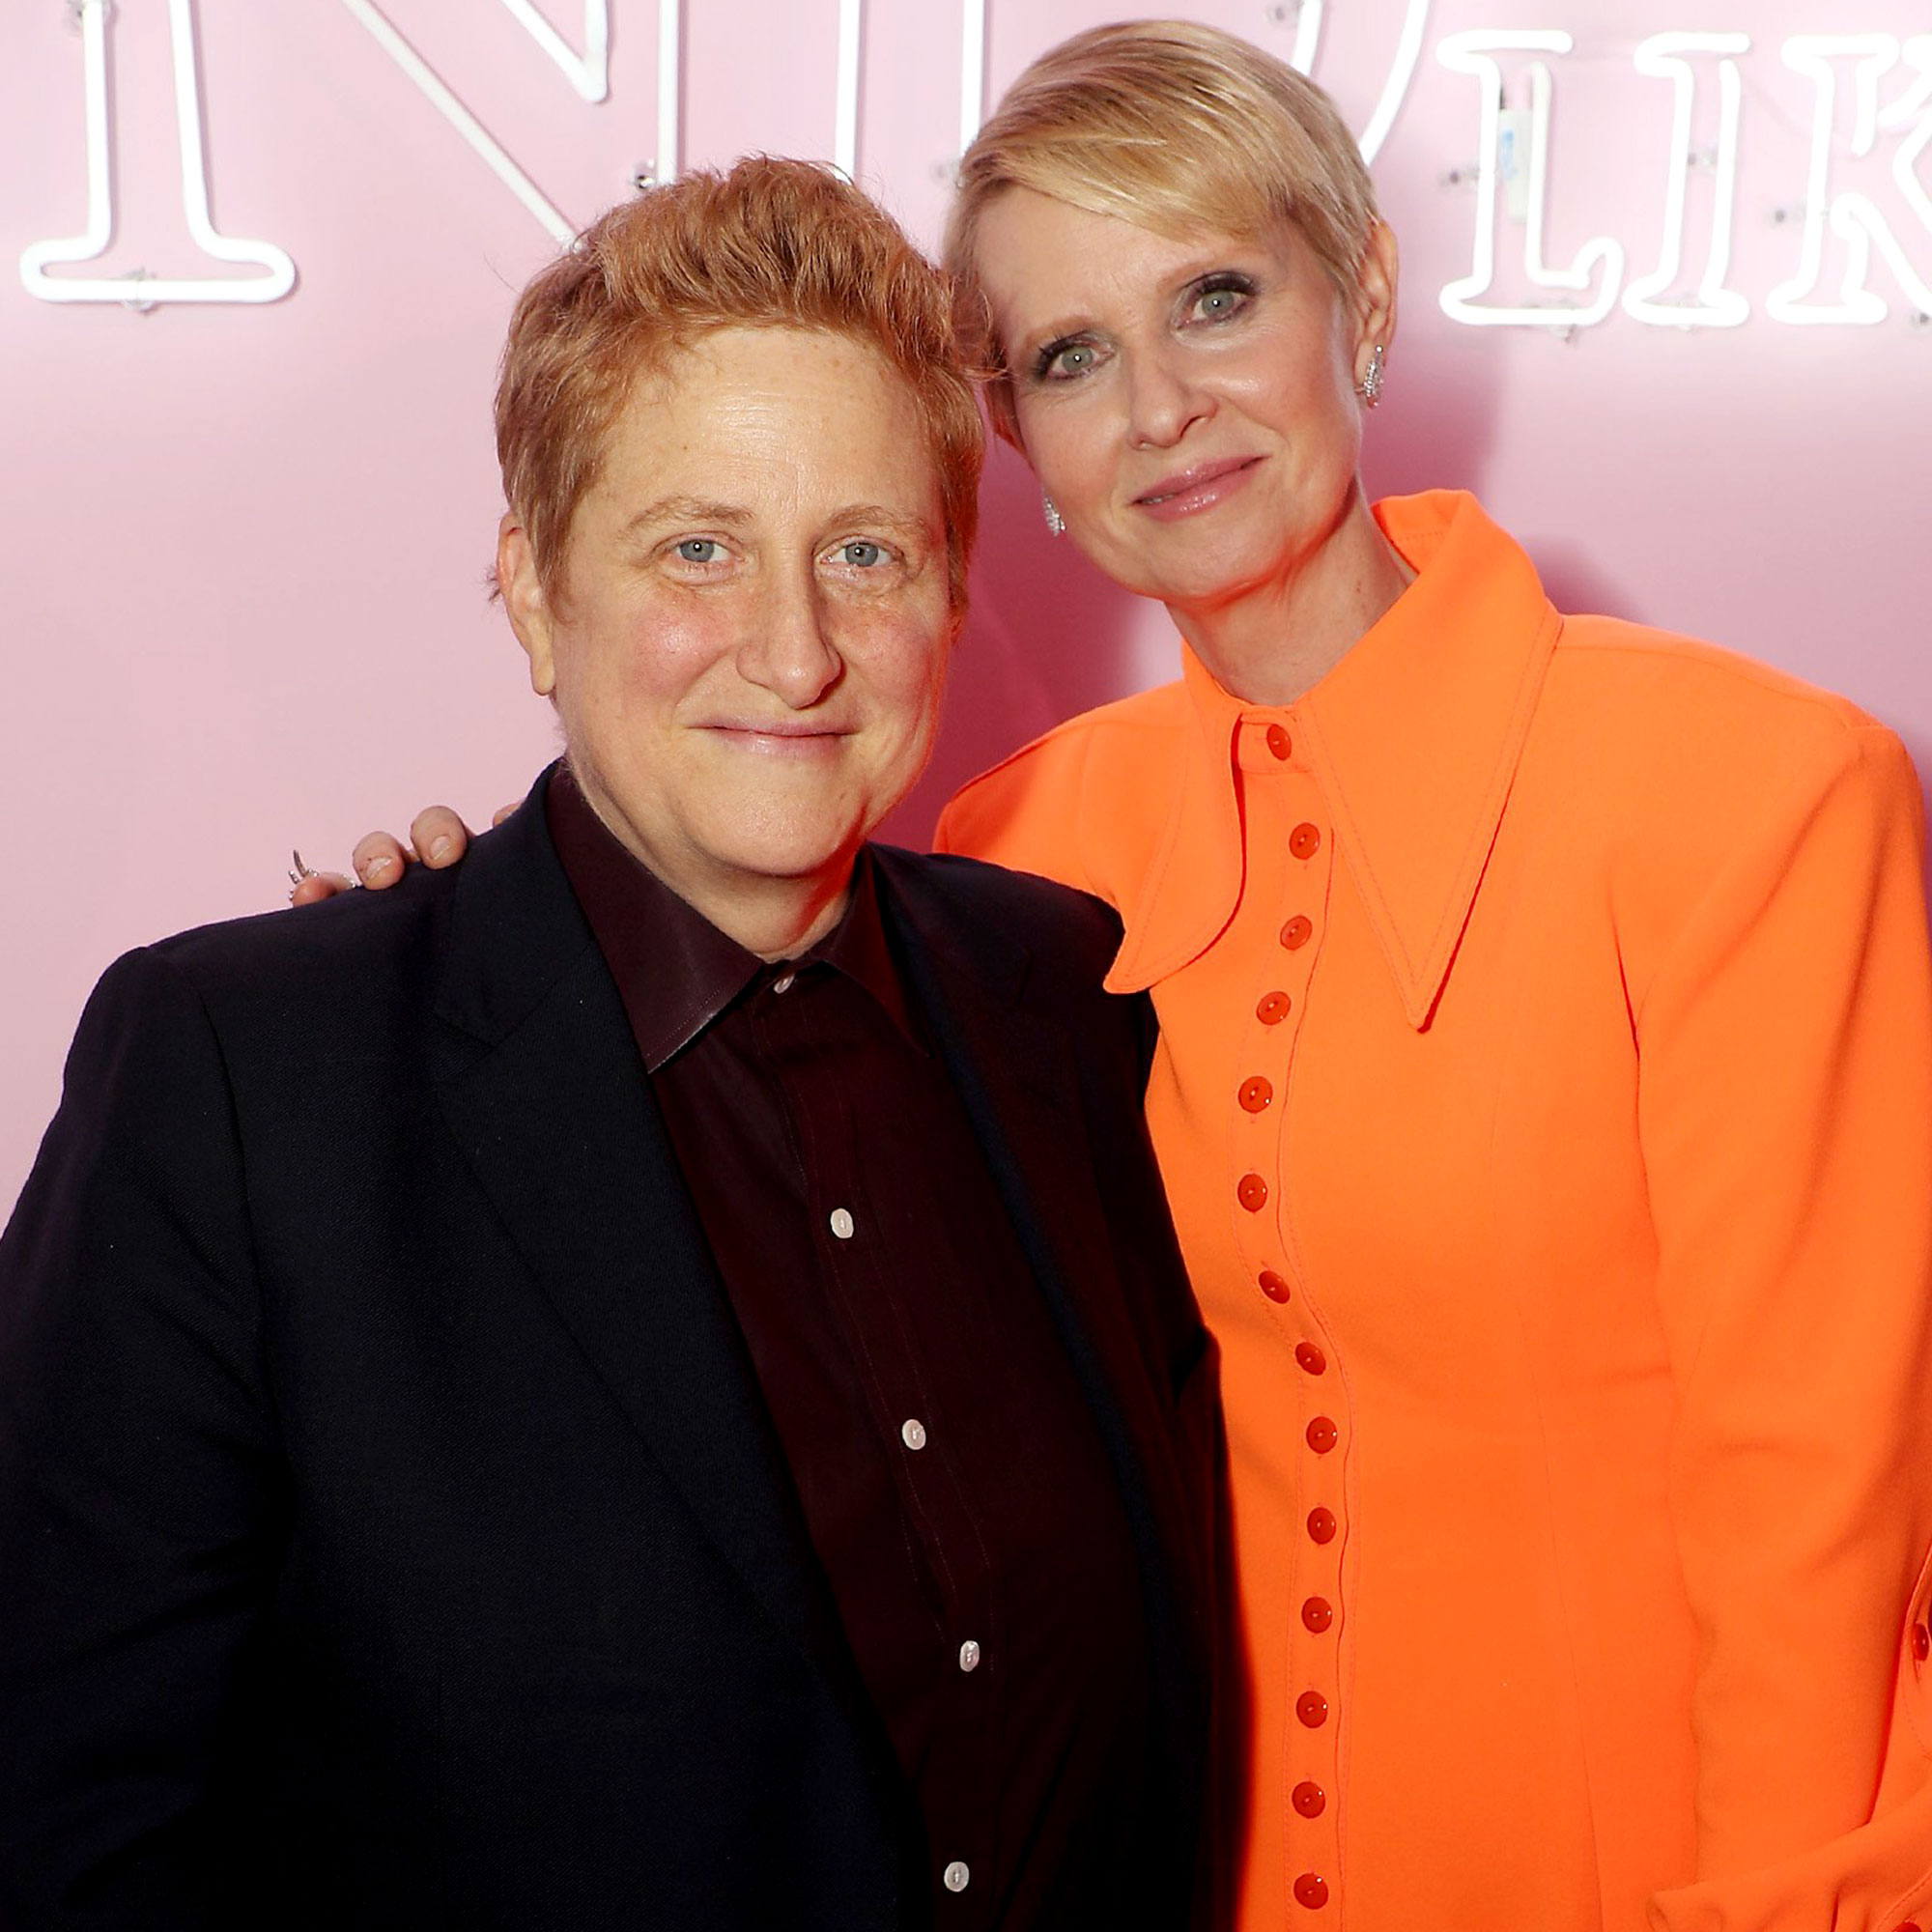 Cynthia Nixon Reveals What Her Wife Thinks of Her Sex Scenes pic